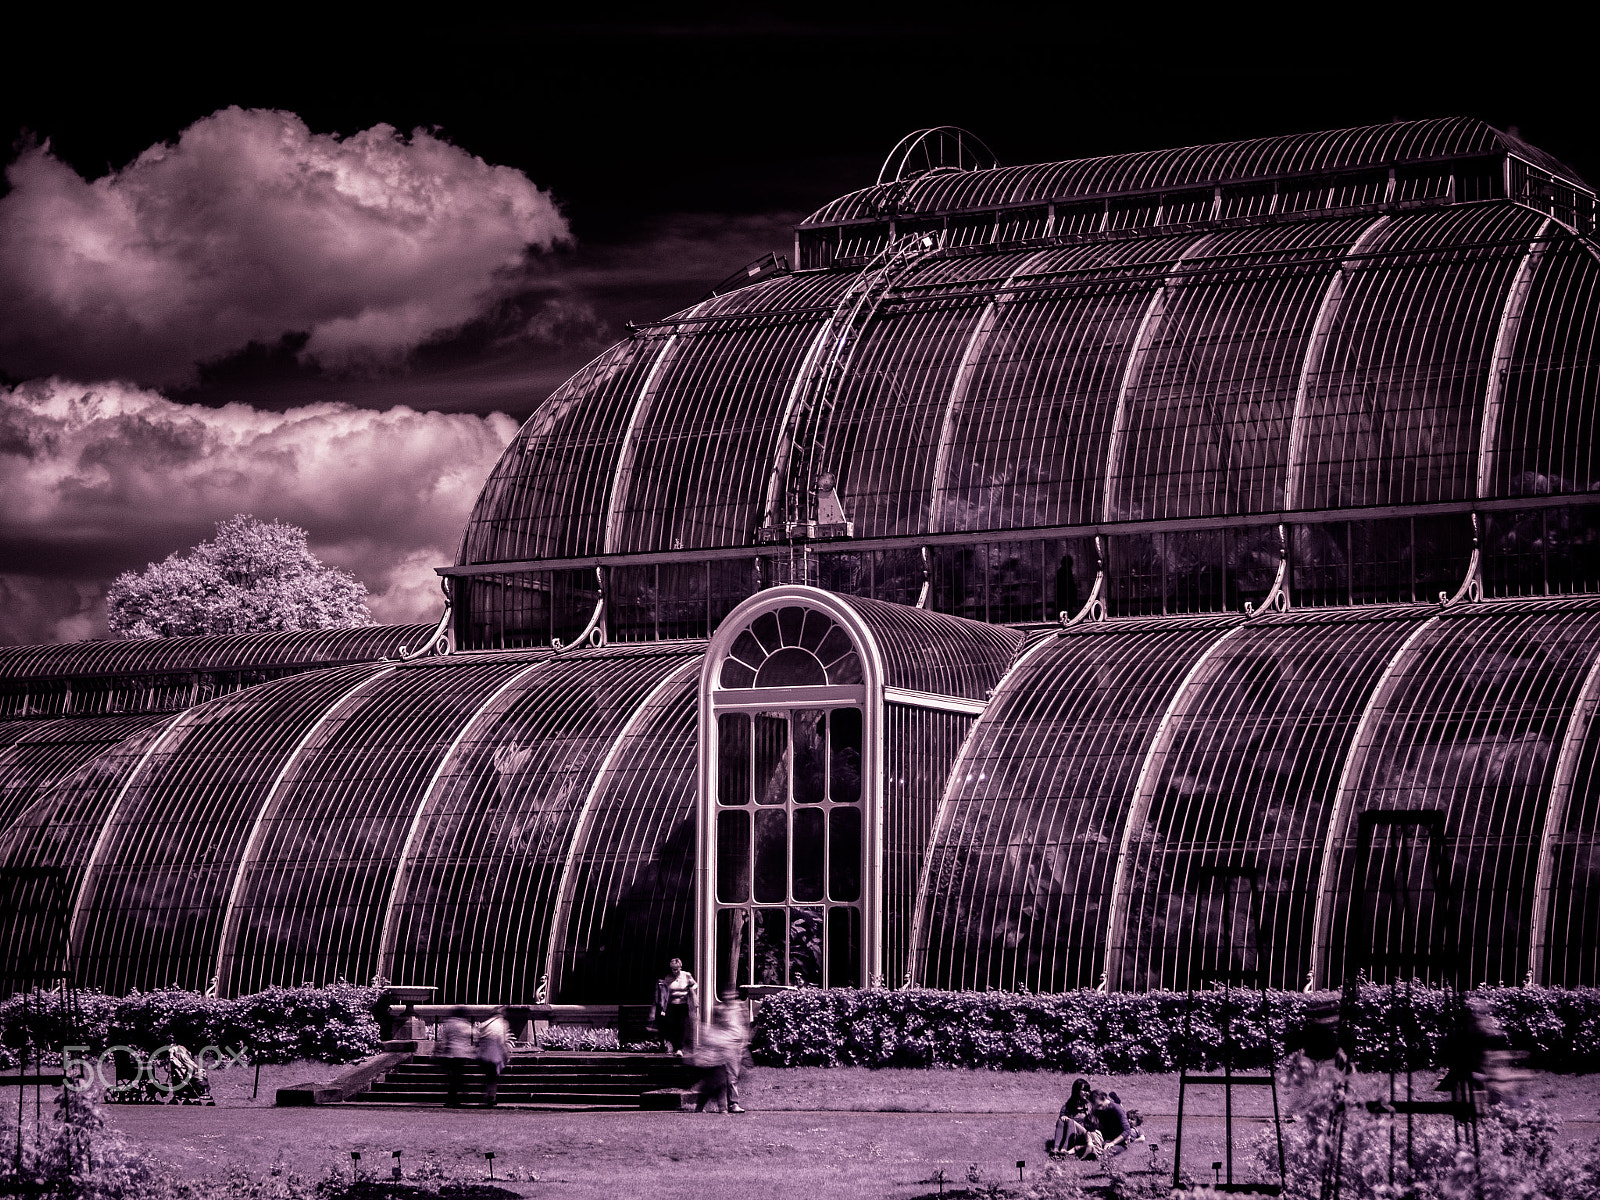 Olympus OM-D E-M1 sample photo. Glasshouse at kew gardens in infrared photography